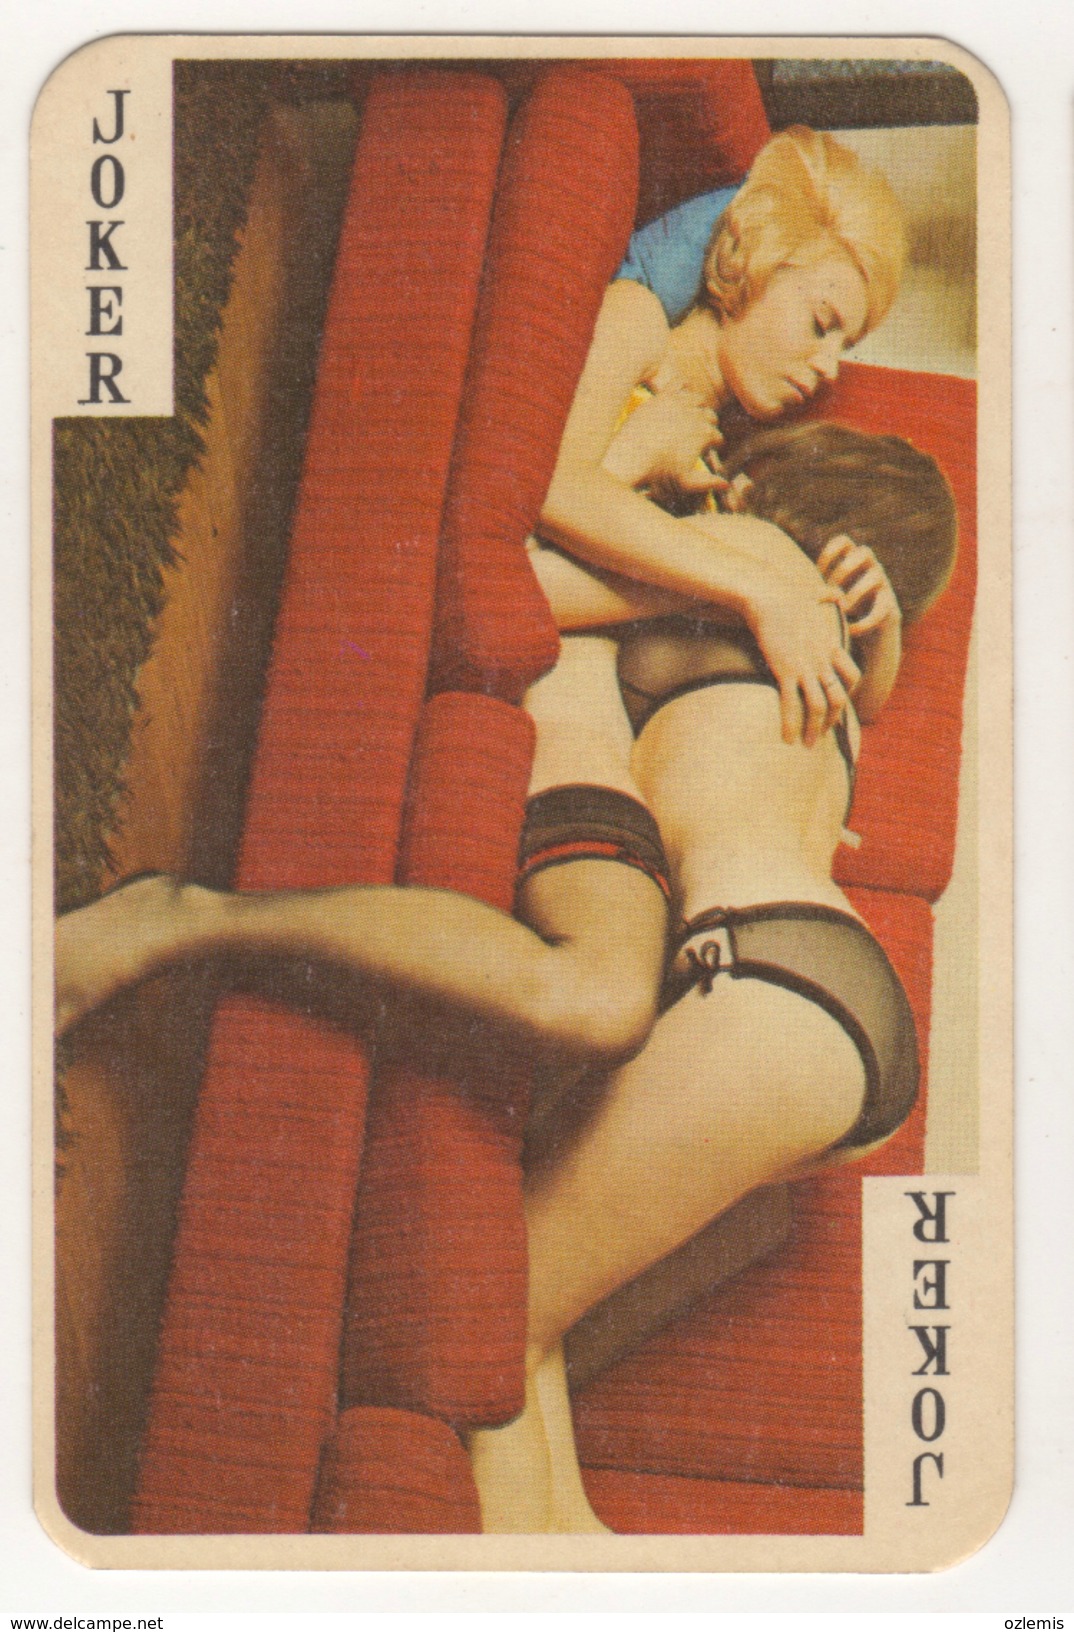 adam knee recommends vintage porn playing cards pic